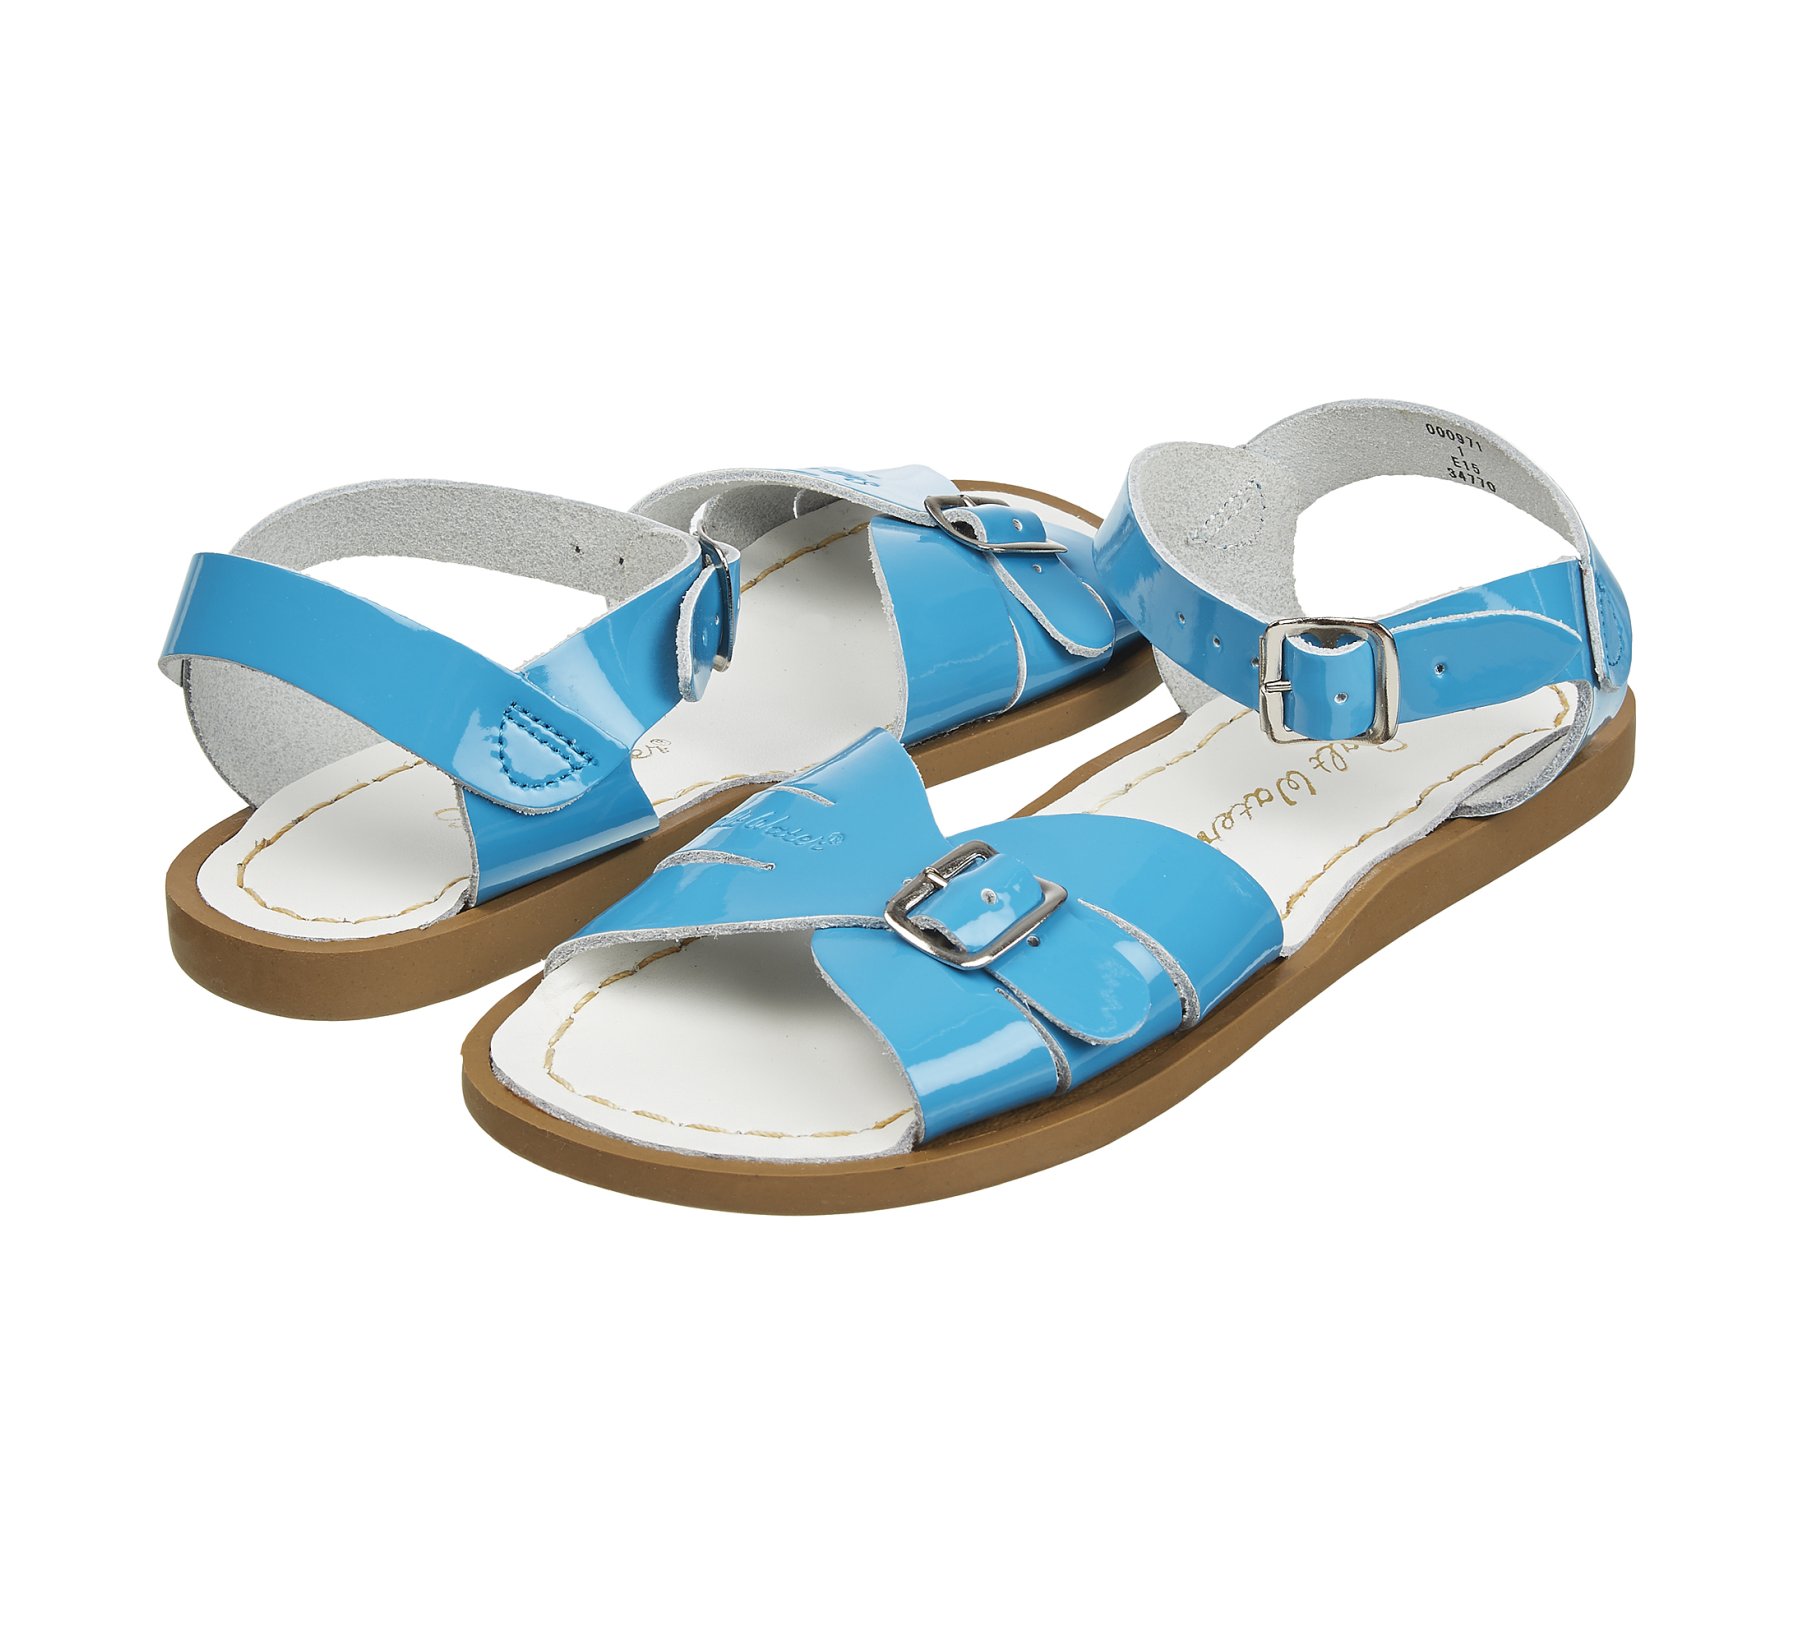 Classic Shiny Turquoise  - Salt Water Sandals